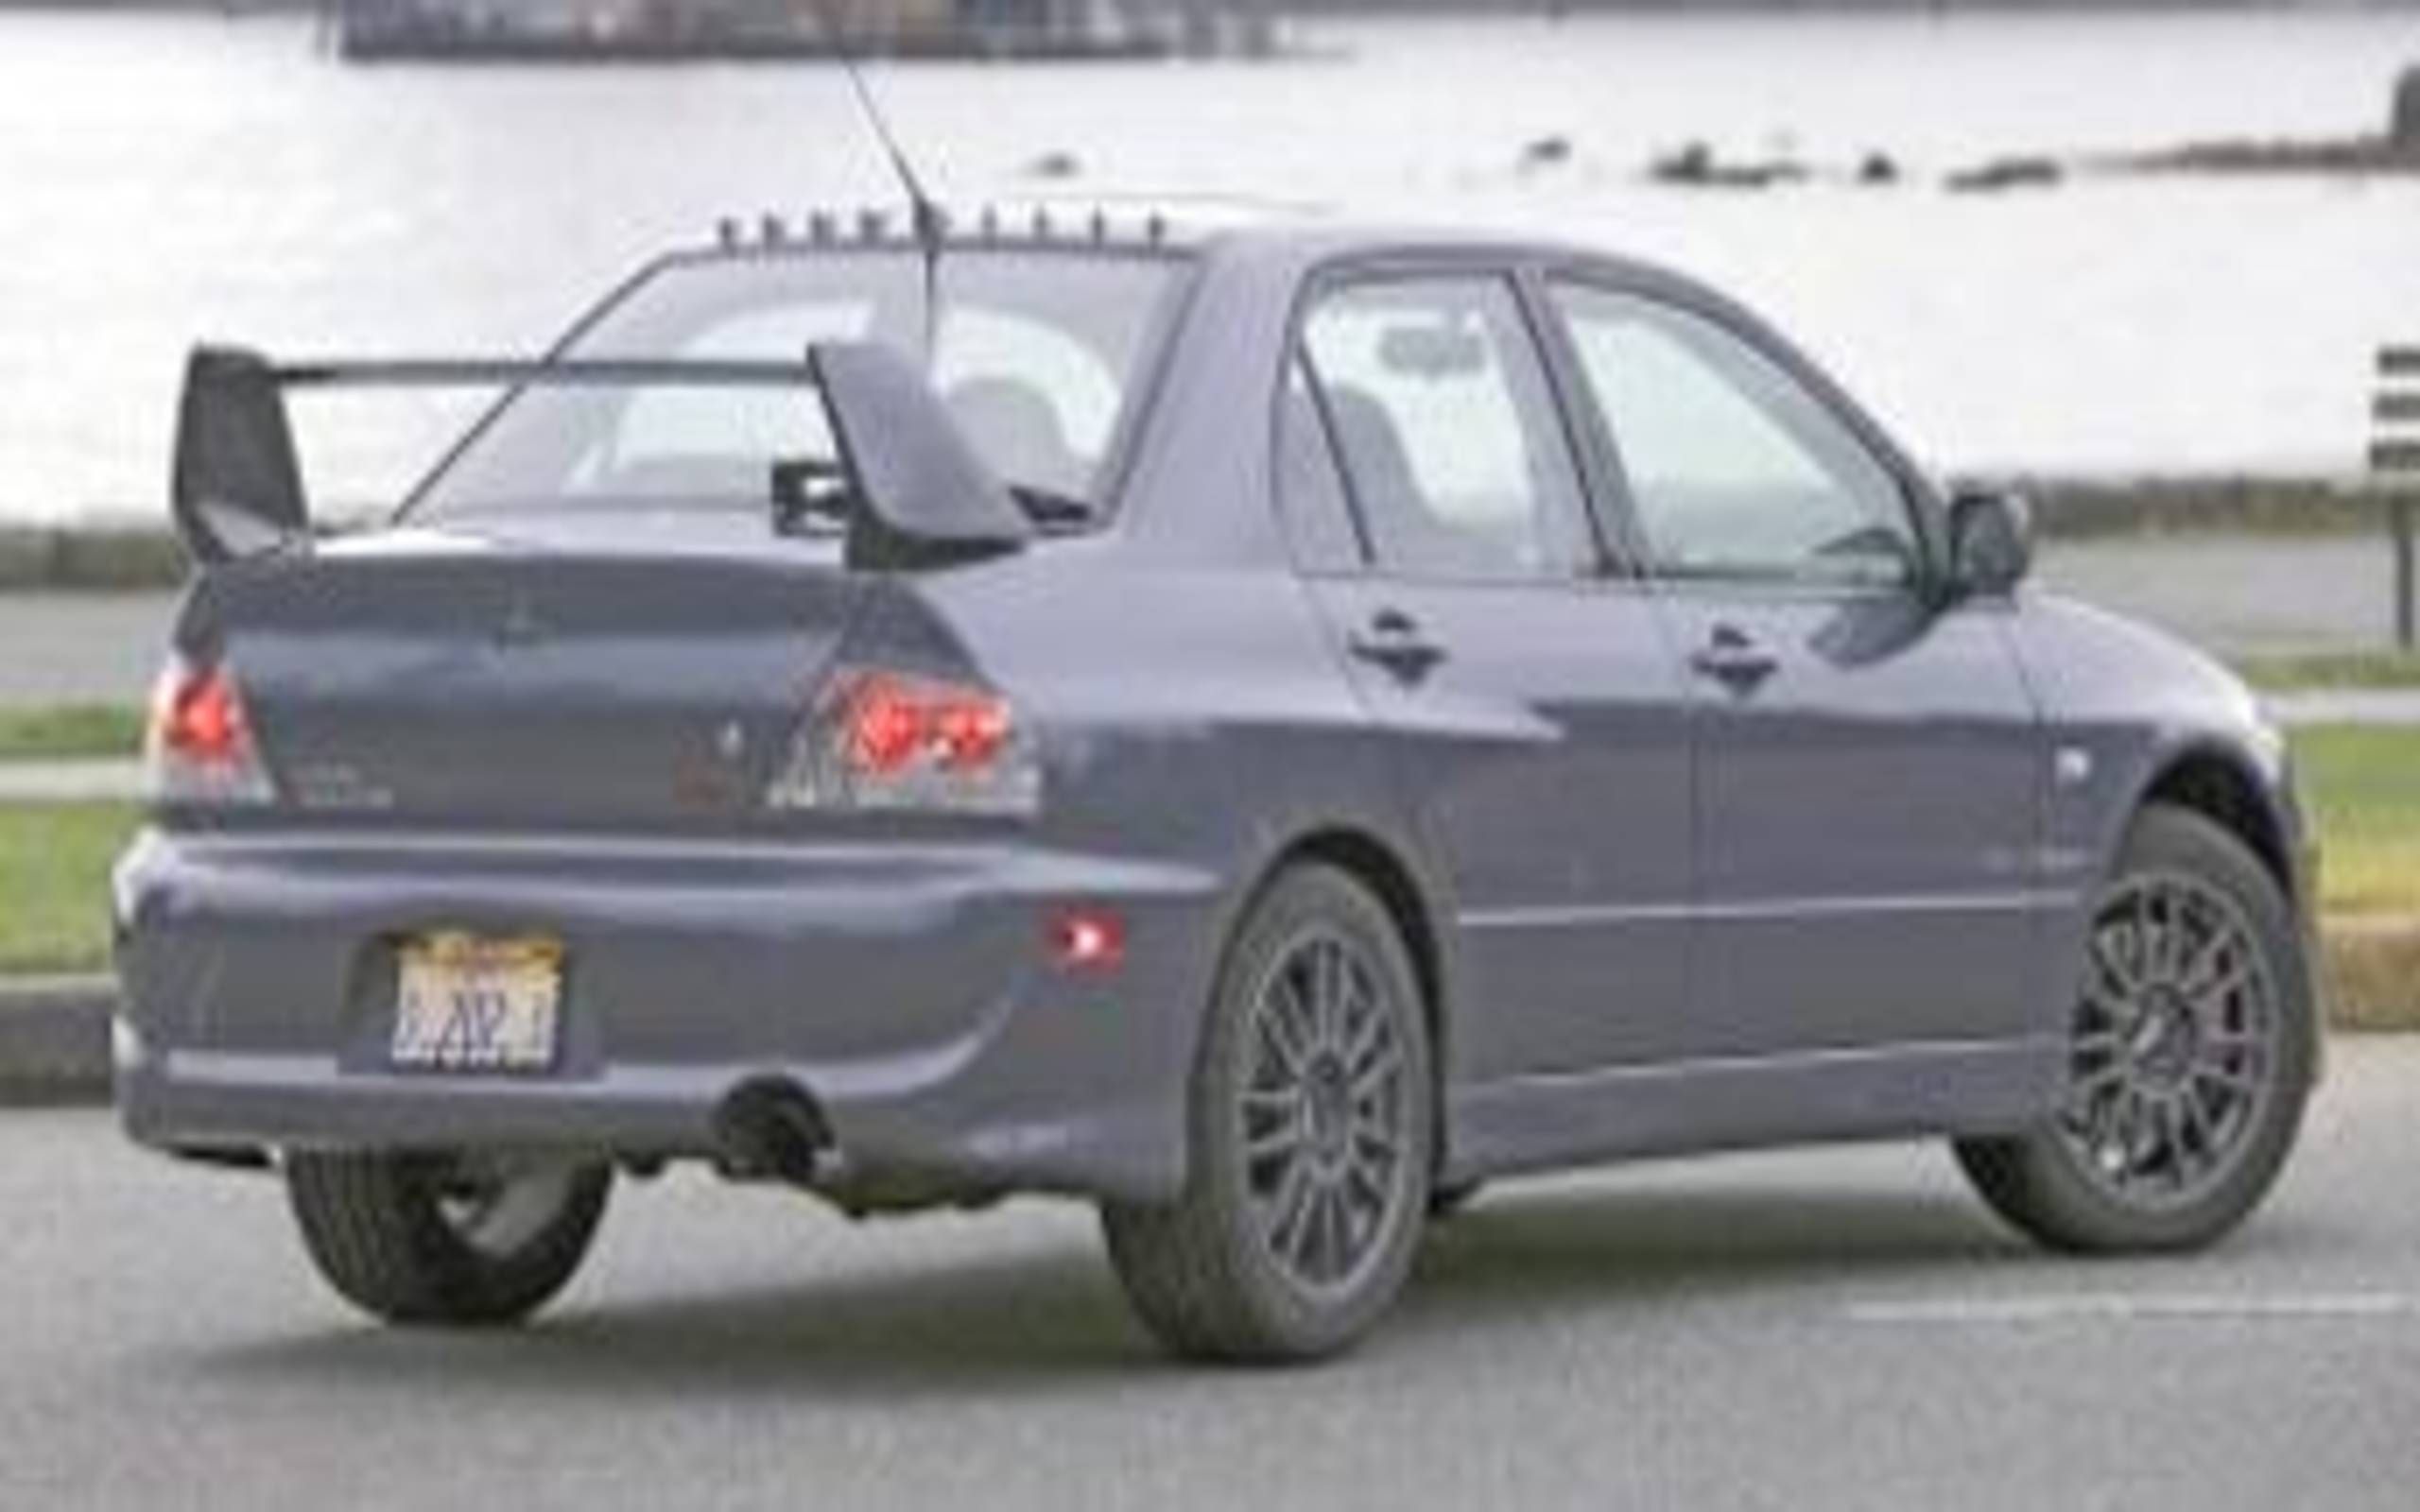 2005 Mitsubishi Lancer Evolution MR: They Call This One 'Mister'